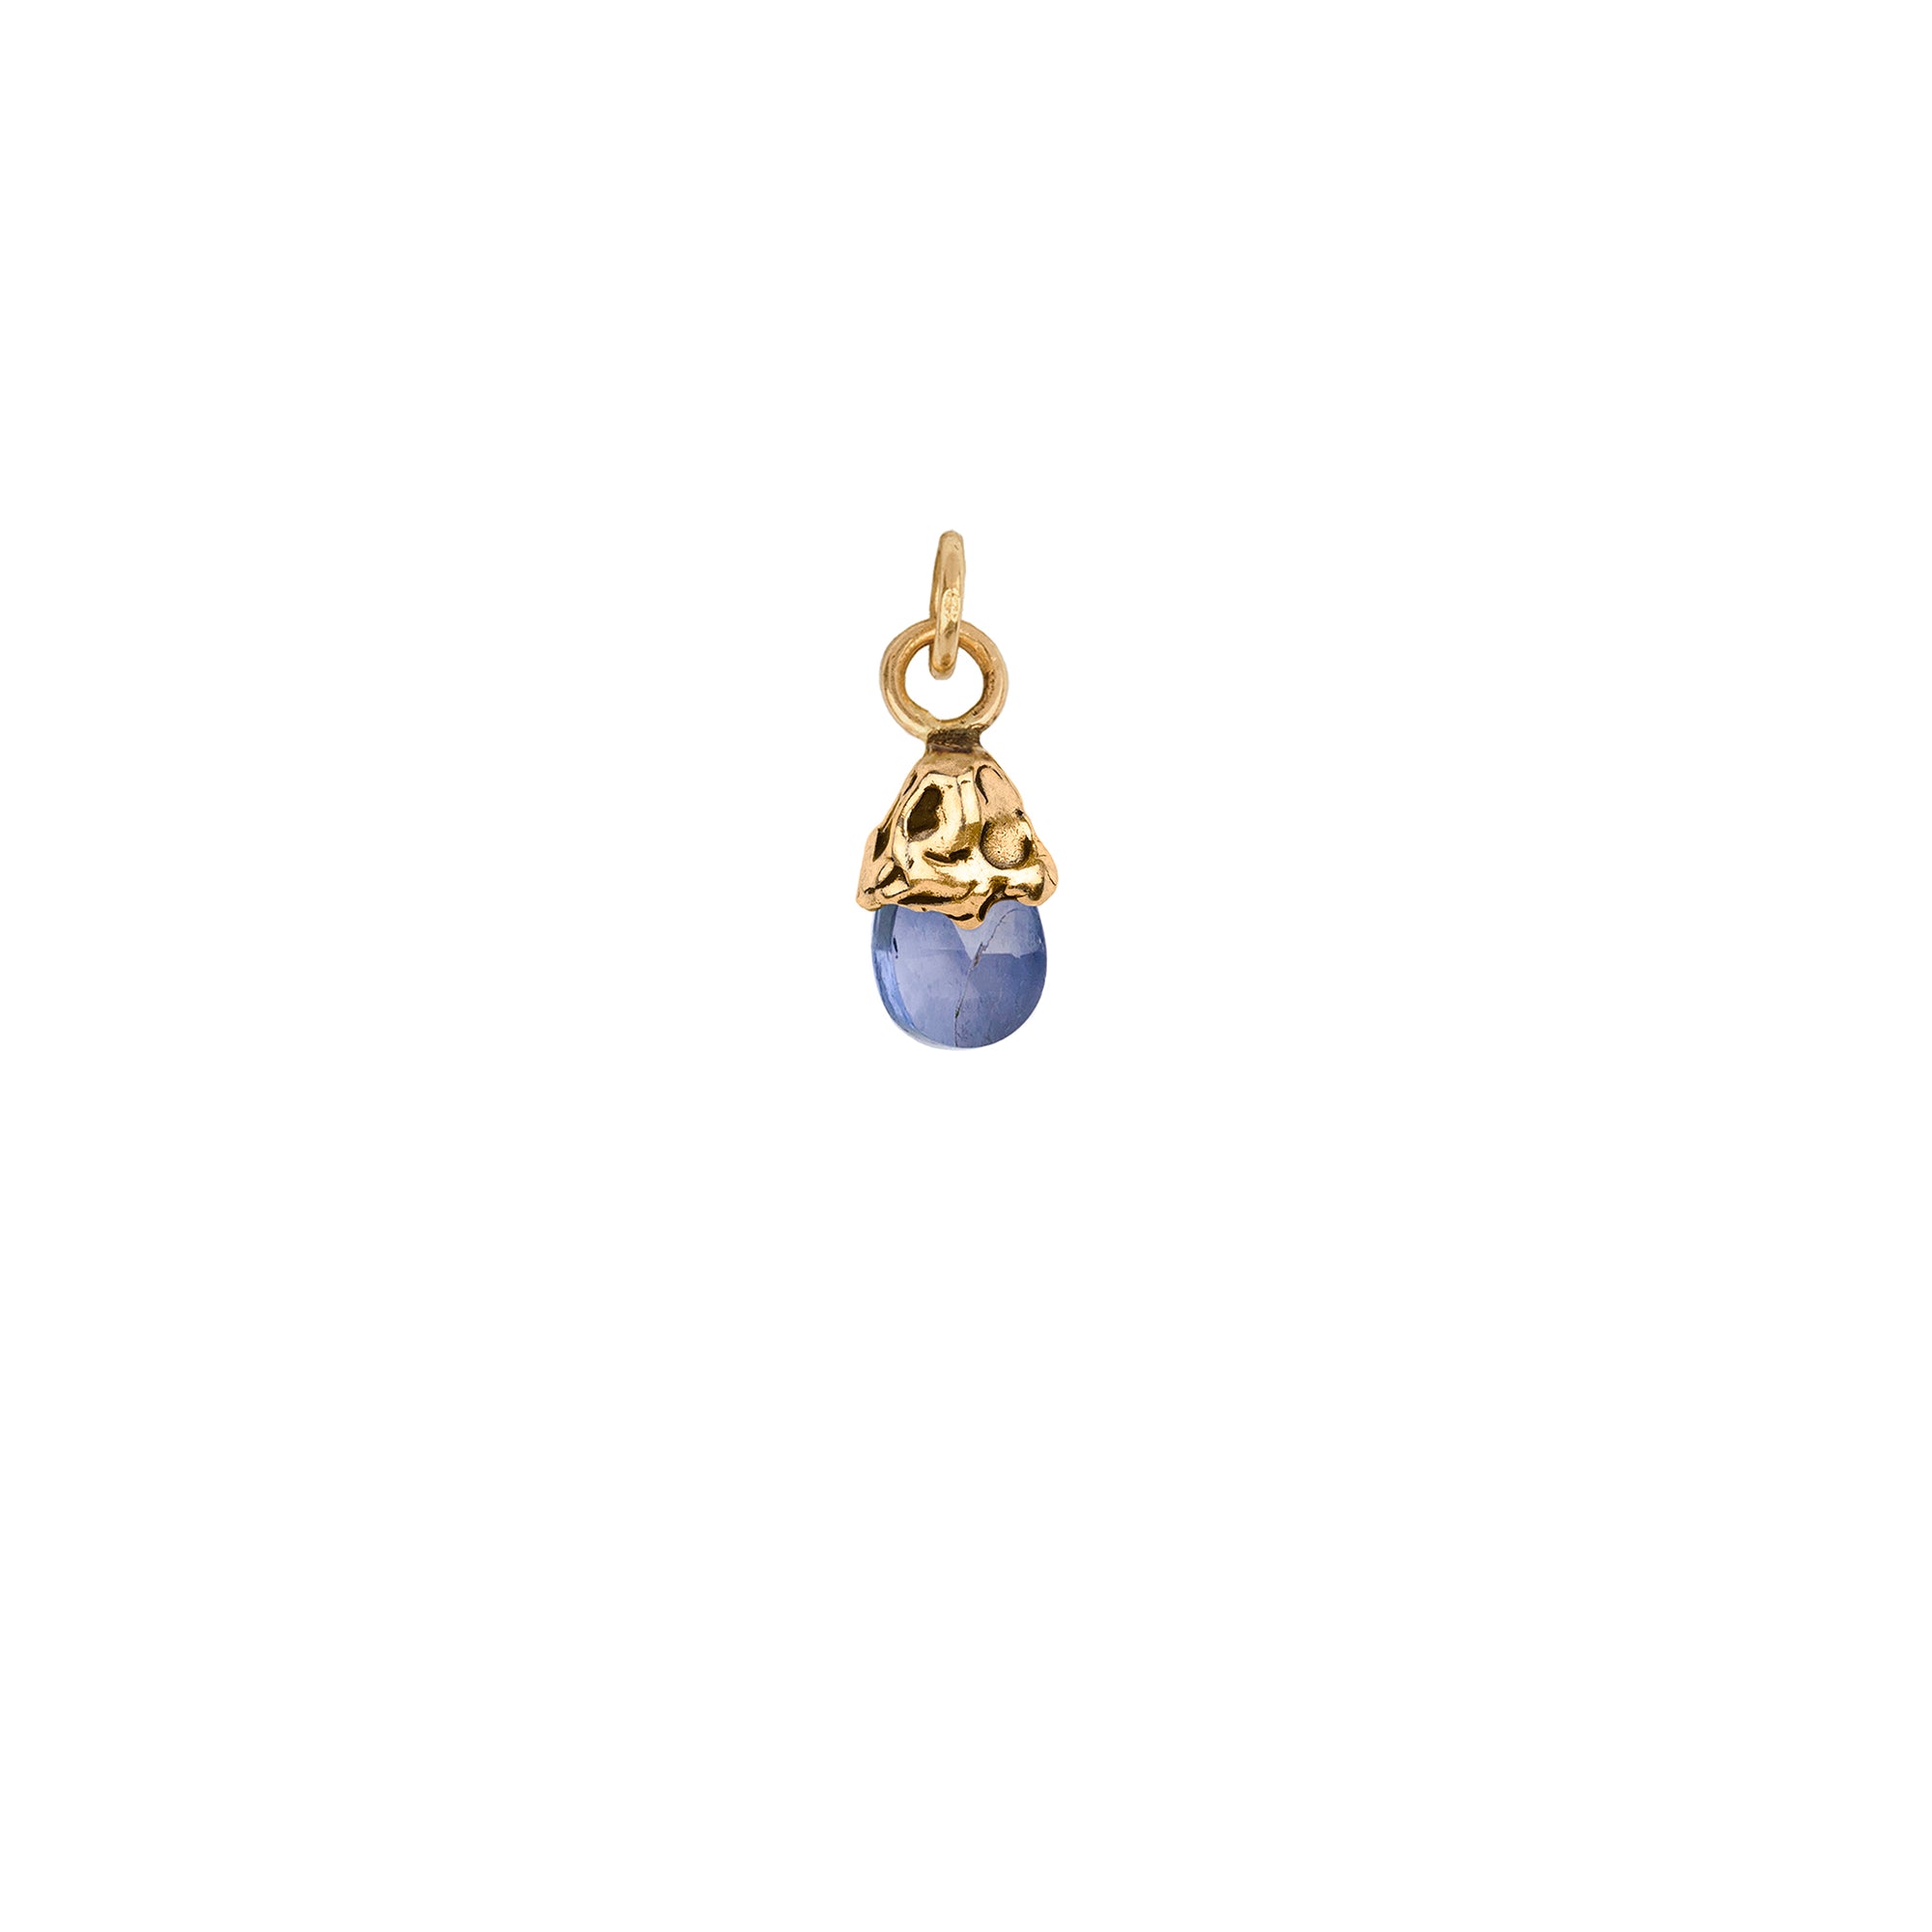 Creativity 14K Gold Capped Attraction Charm